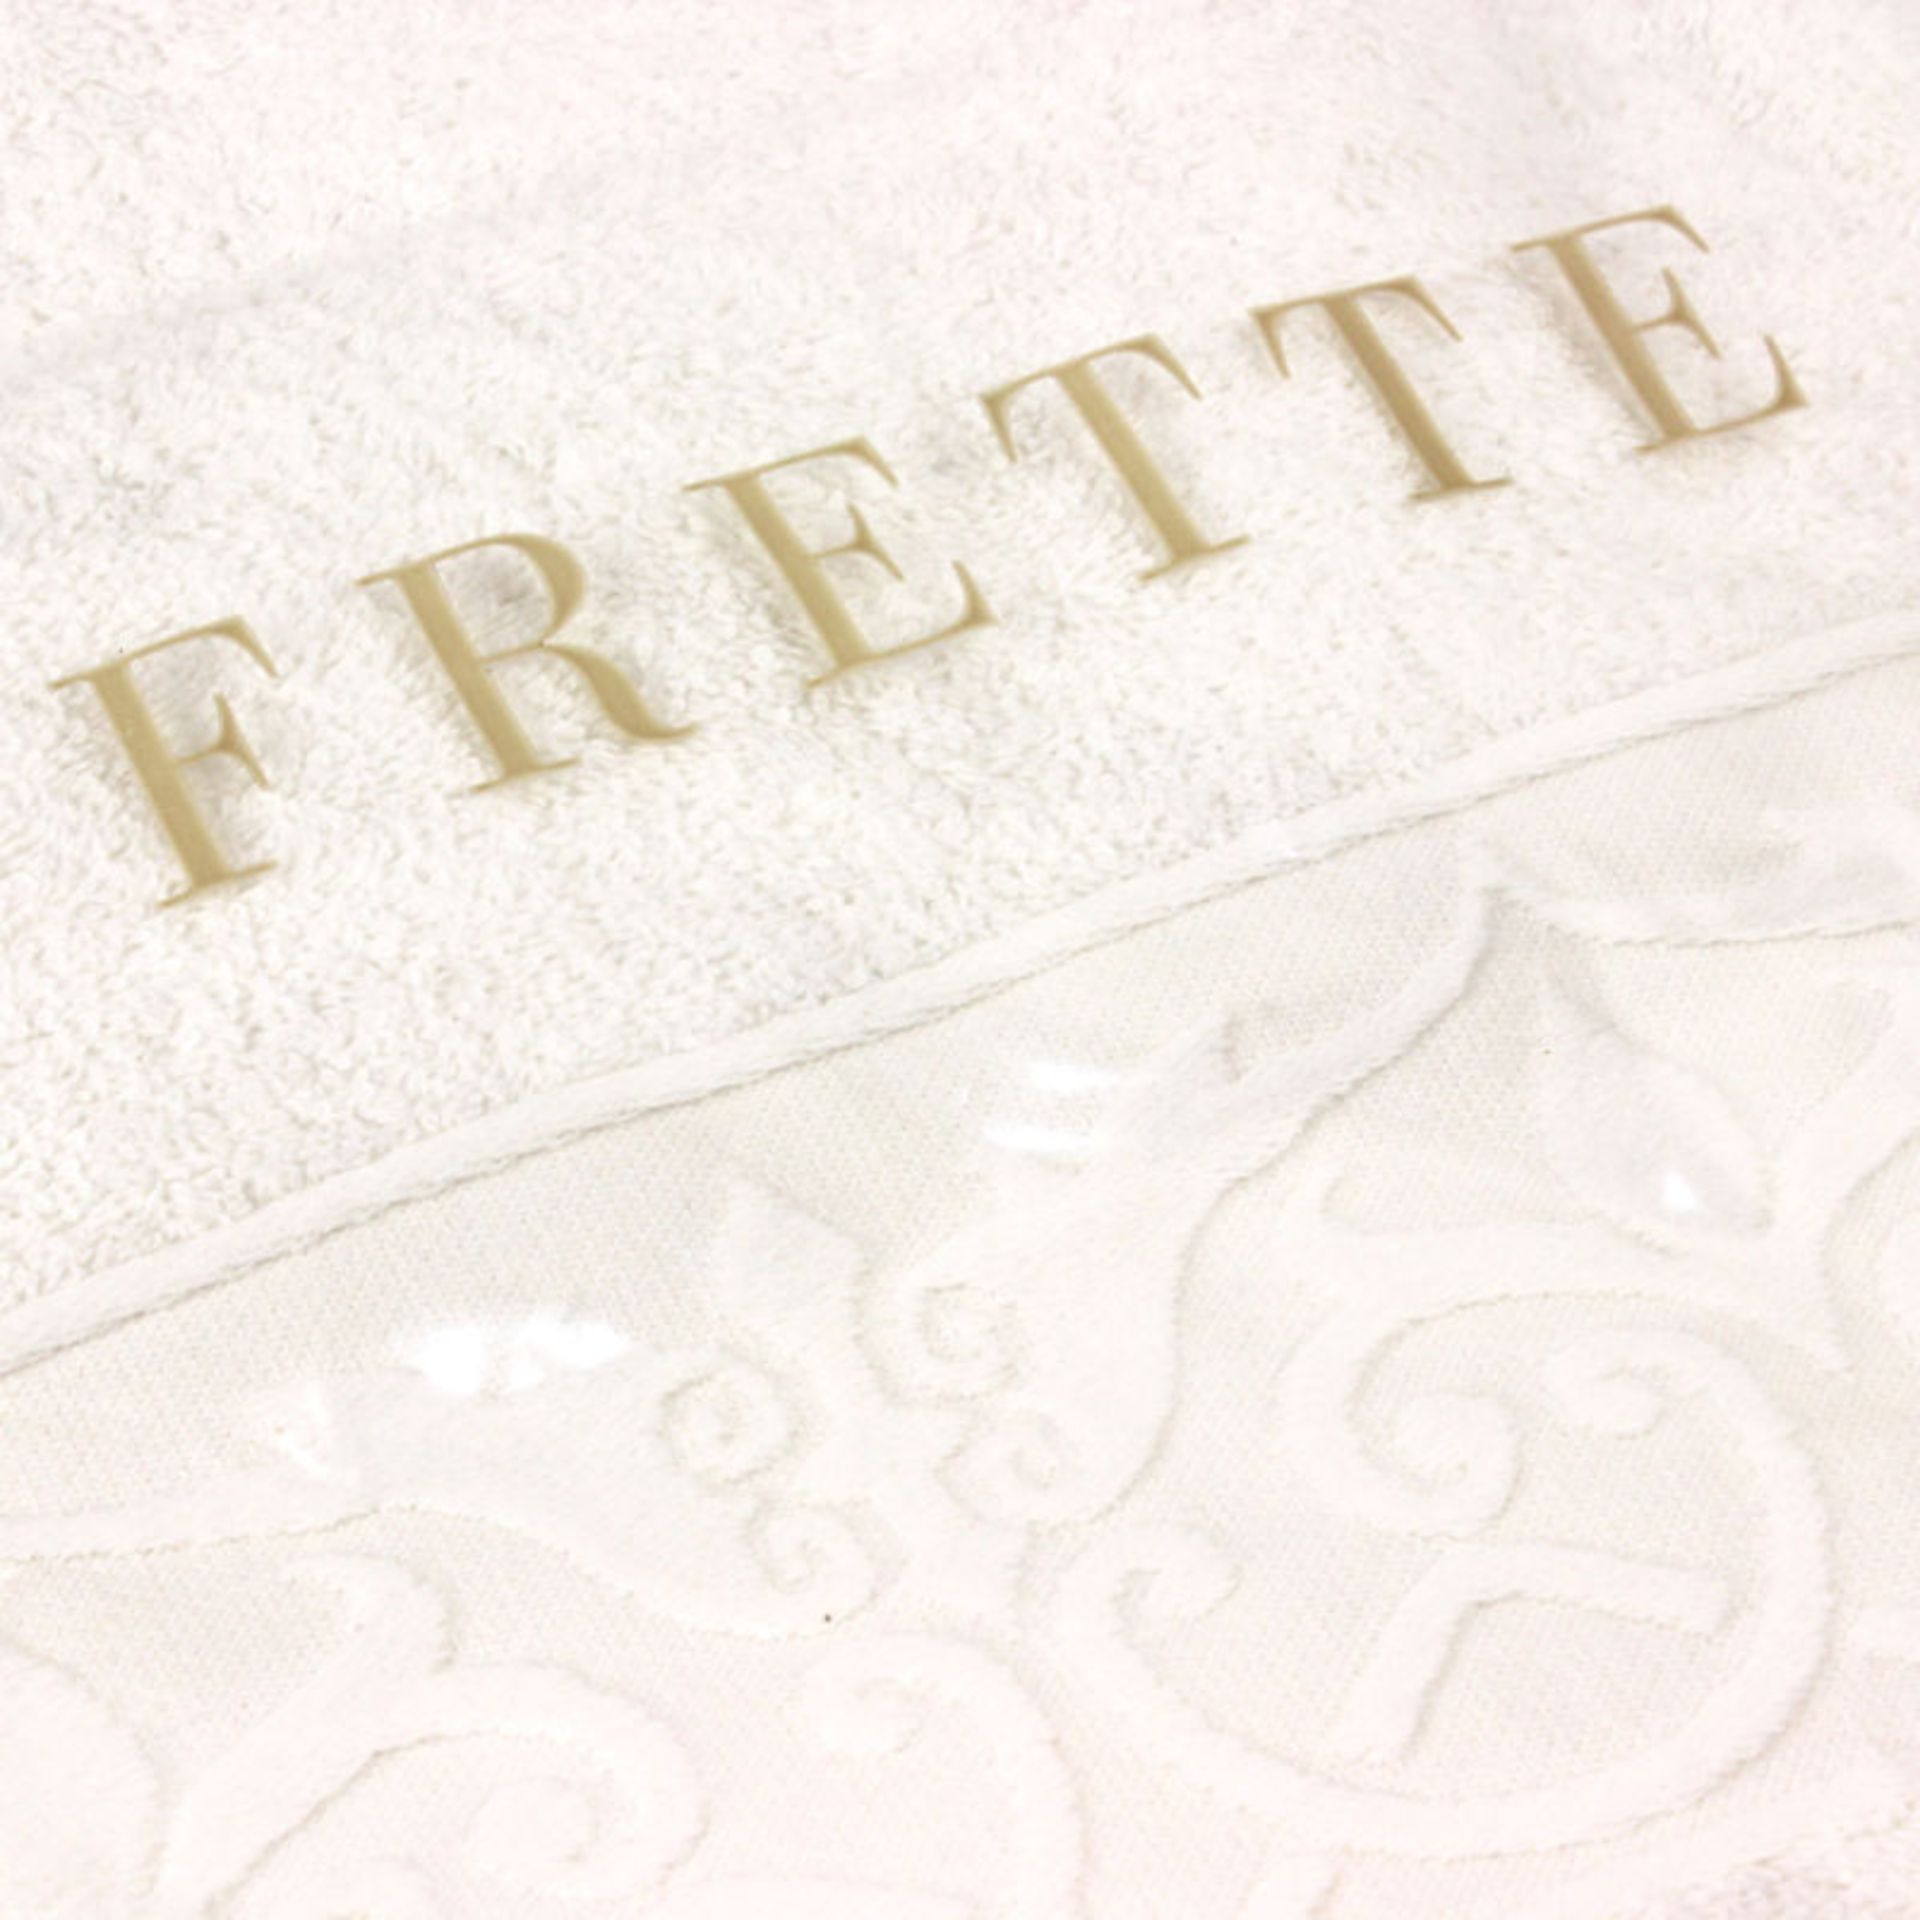 V *TRADE QTY* Brand New Frette Italian White Bath Towel With Embossed Pattern X 40 YOUR BID PRICE TO - Image 2 of 2